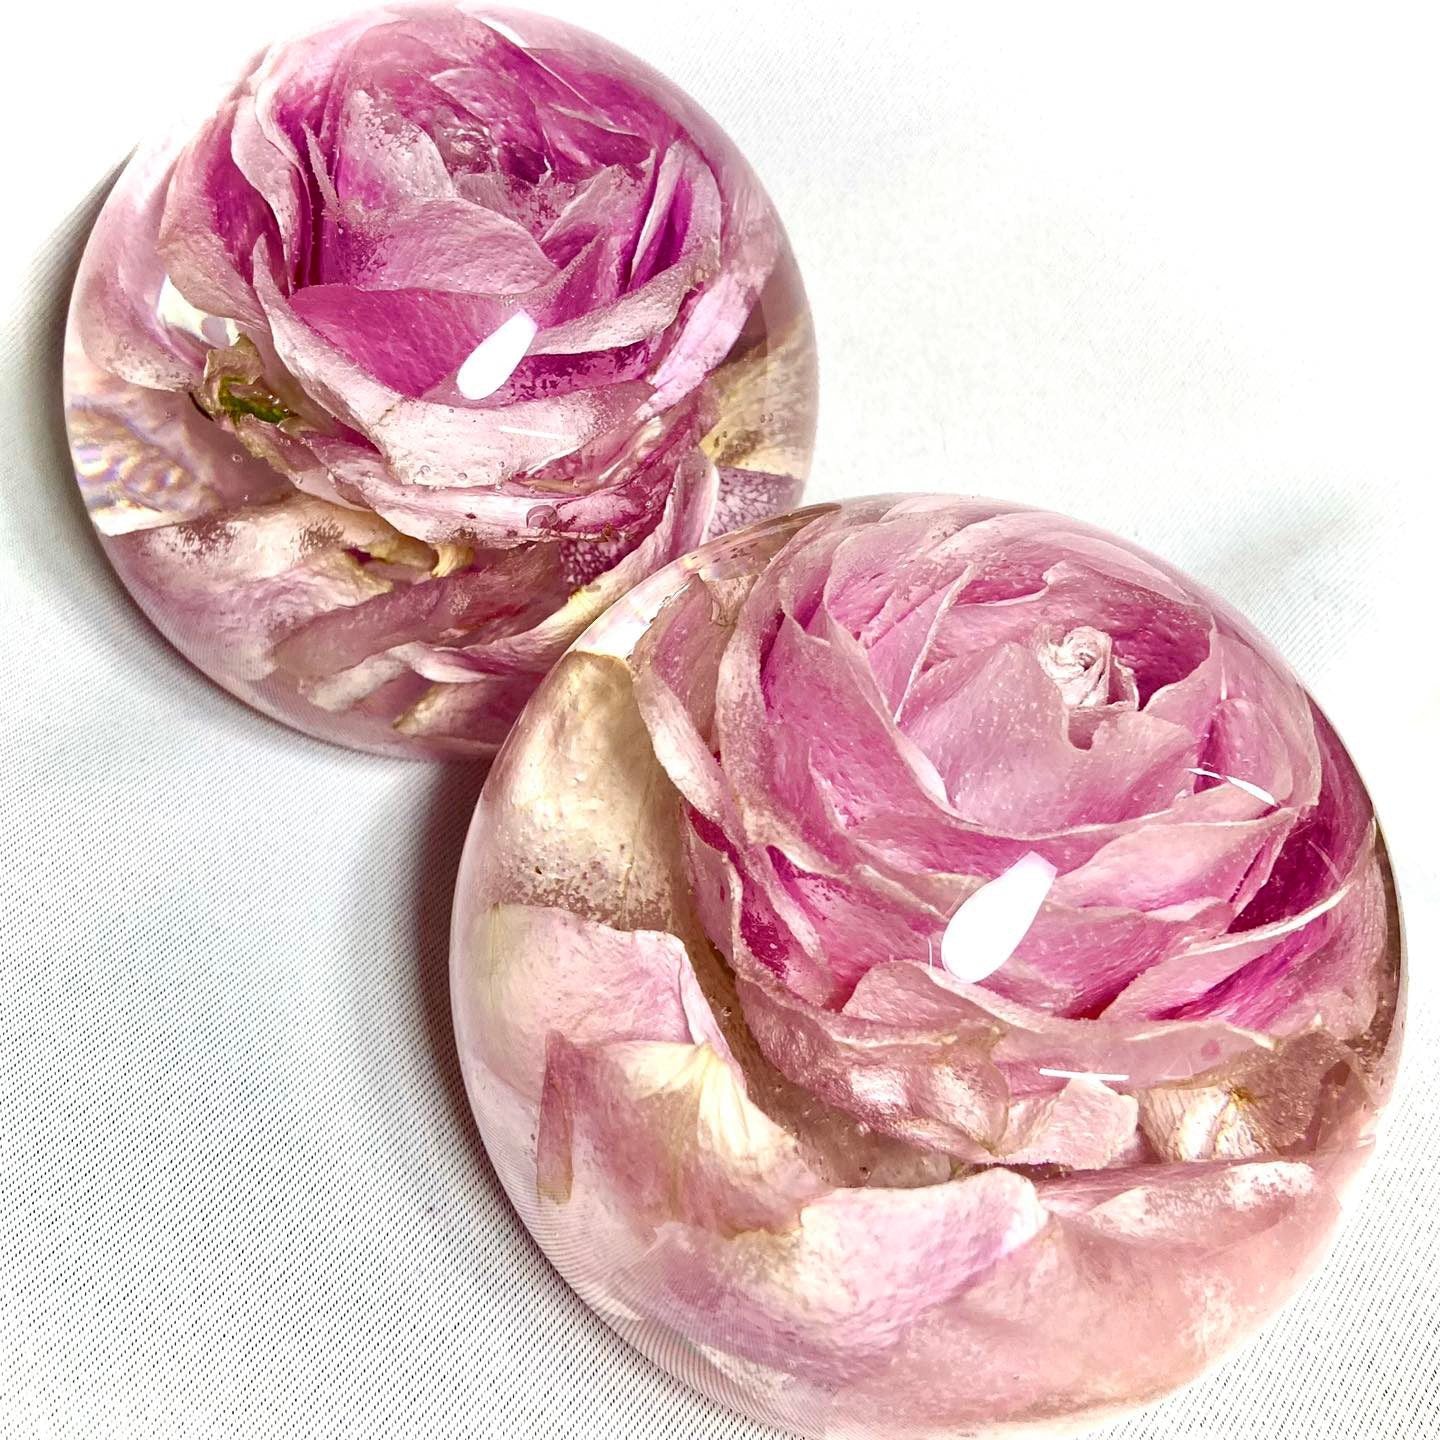 Preserve your memories of the special day with our beautiful Wedding Flowers Resin Sphere Paperweight. Handcrafted with love, our large resin spheres are perfect for showcasing your stunning wedding flowers in an elegant and unique way.